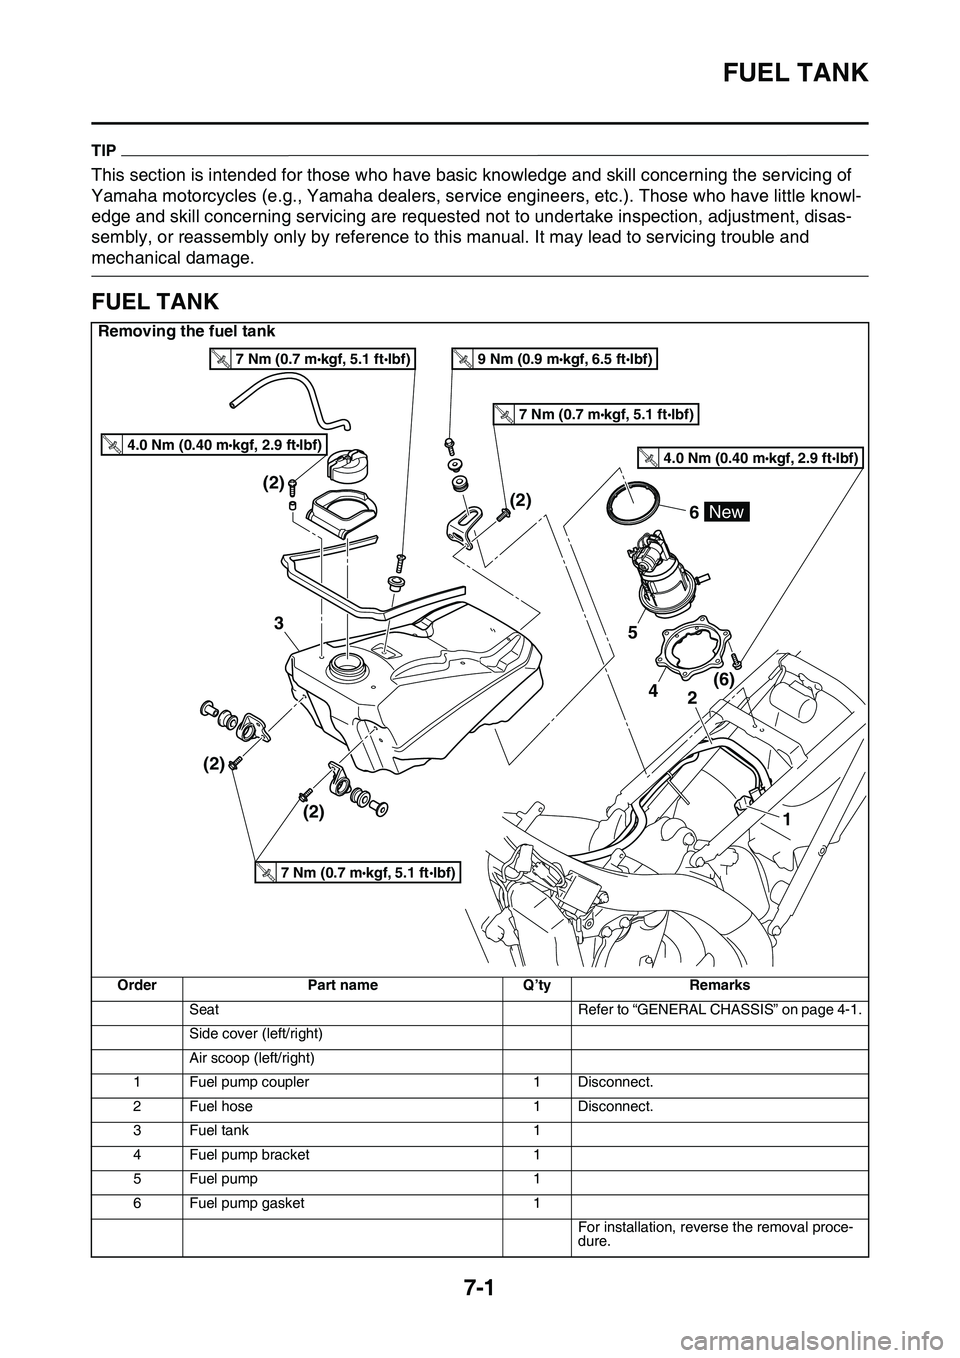 YAMAHA YZ450F 2014 Owners Guide FUEL TANK
7-1
EAS1SL1304
TIP
This section is intended for those who have basic knowledge and skill concerning the servicing of 
Yamaha motorcycles (e.g., Yamaha dealers, service engineers, etc.). Thos